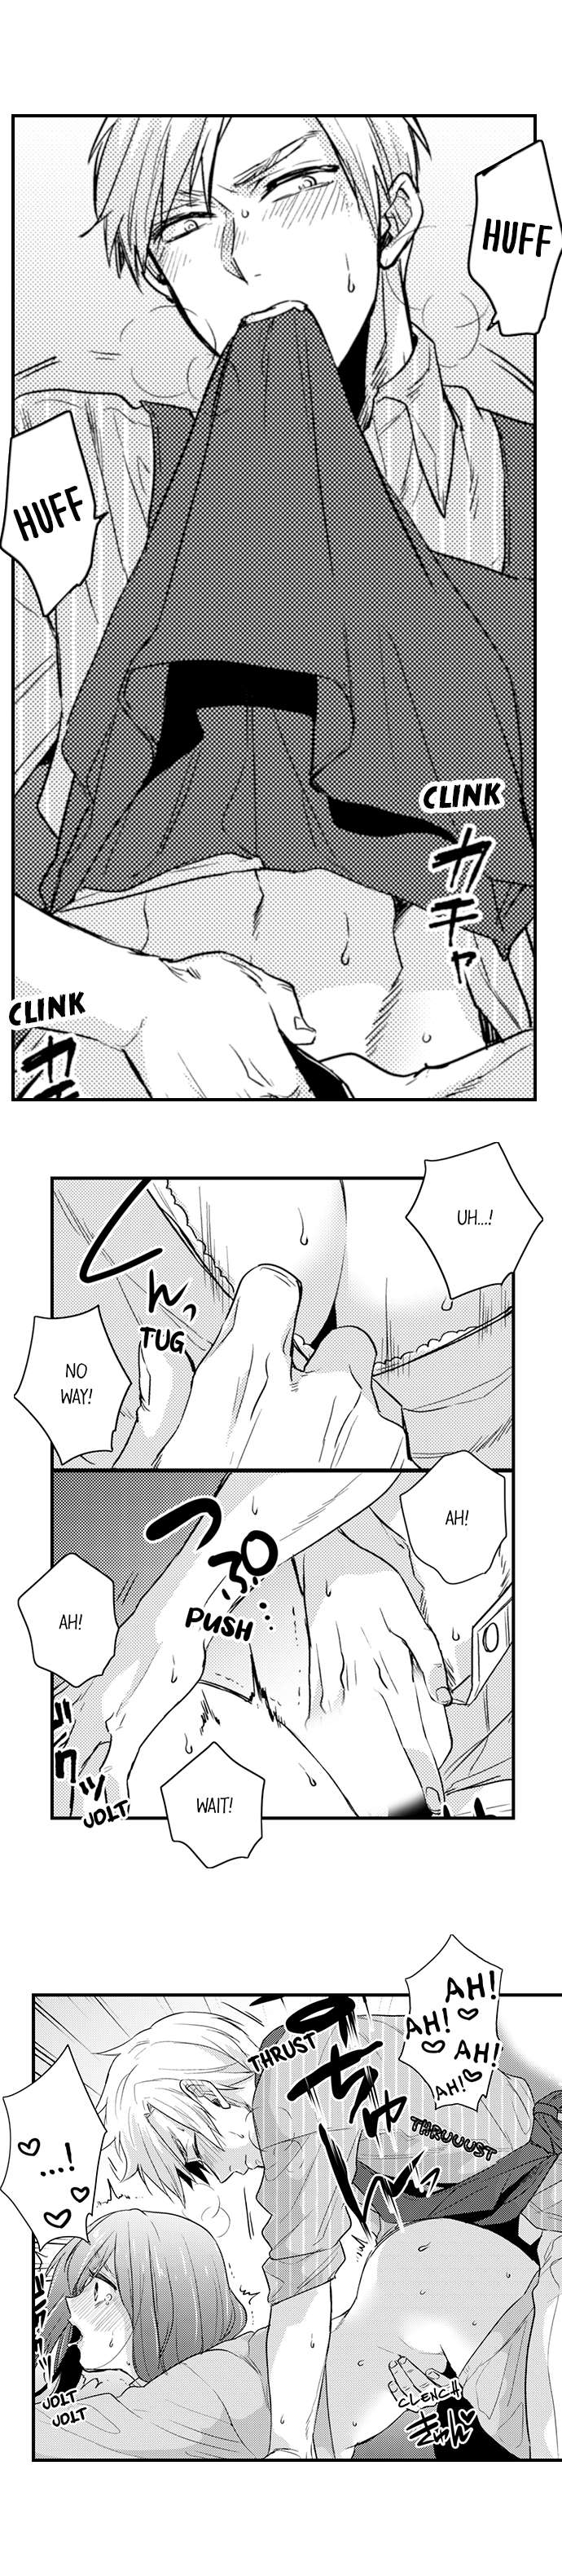 The Massage ♂♀ The Pleasure of Full Course Sex Chapter 4 - Page 7